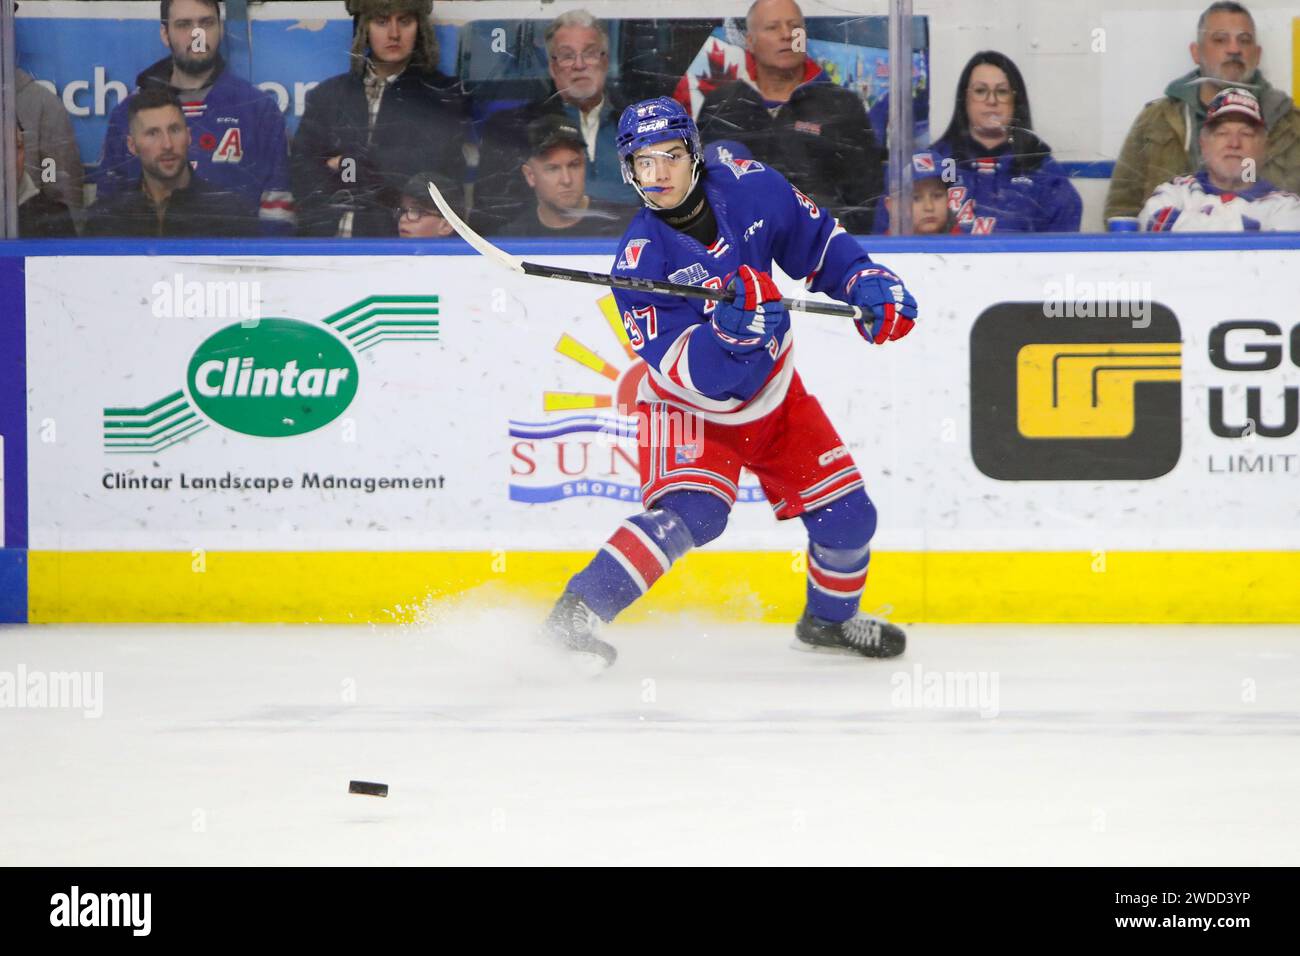 Kitchener, Canada. 19th Jan, 2024. Kitchener Ontario Canada, Jan 19 2024, The London Knights extend their winning streak to 13 games with a win over Kitchener. (Editorial Only) Tanner Lam(37) of the Kitchener Rangers. Credit: Luke Durda/Alamy Live News Stock Photo